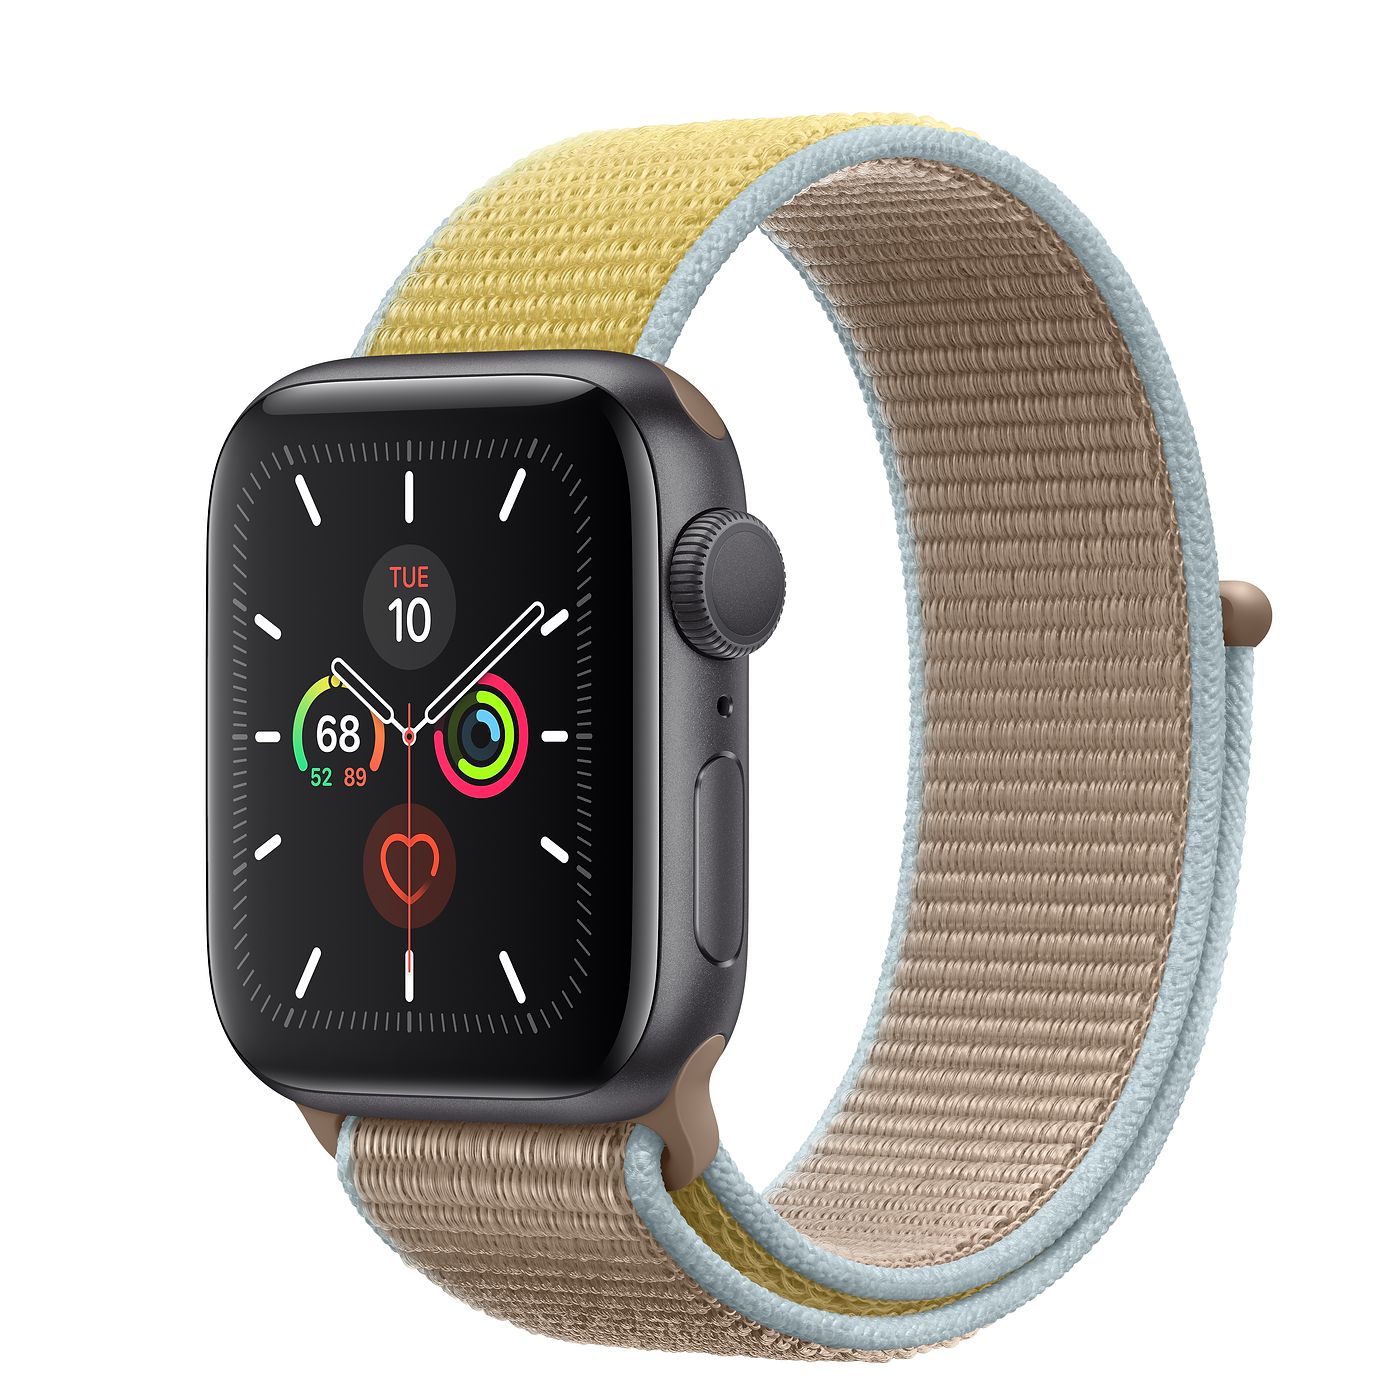 Apple Watch Series 5 GPS 40mm Space Gray Aluminum with Camel Sport ...